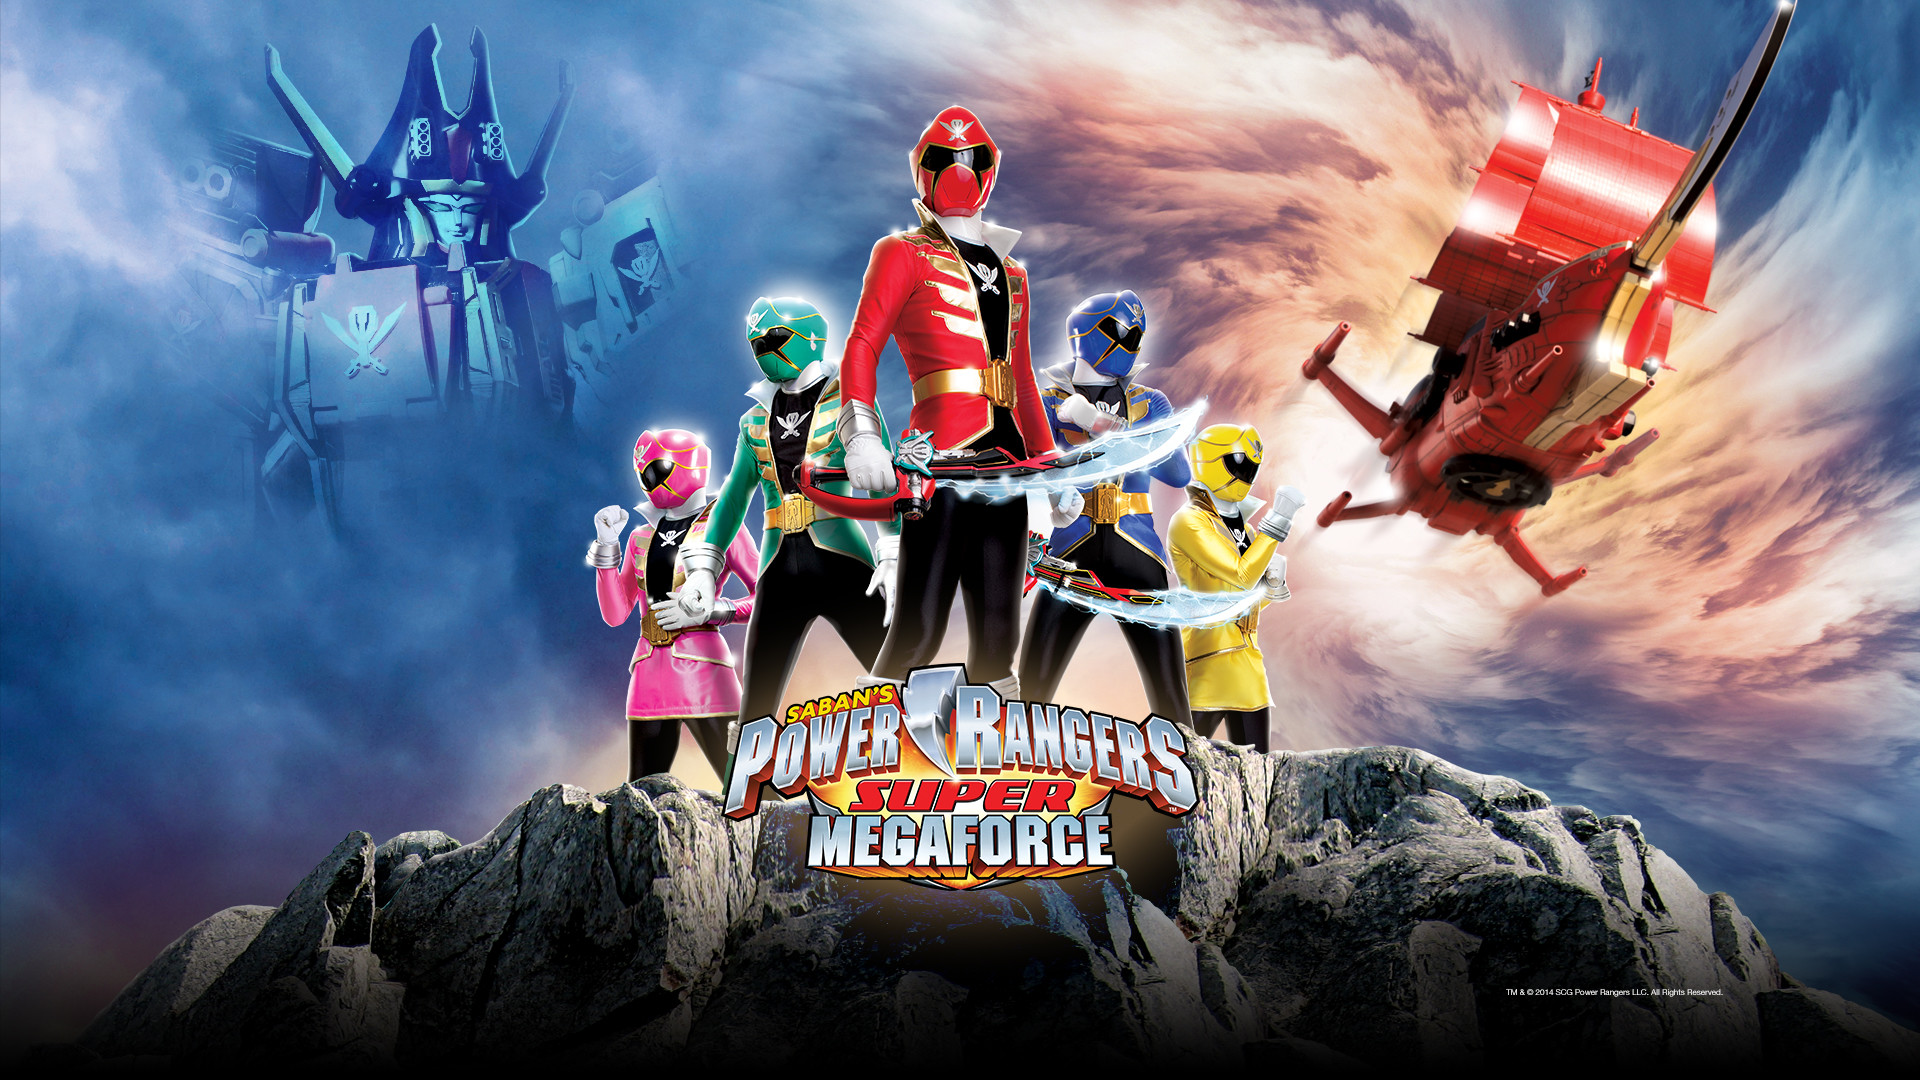 1920x1080 For added fun, click on the image to download these Power Ranger wallpapers  to keep your phone and desktop looking bright and exciting.